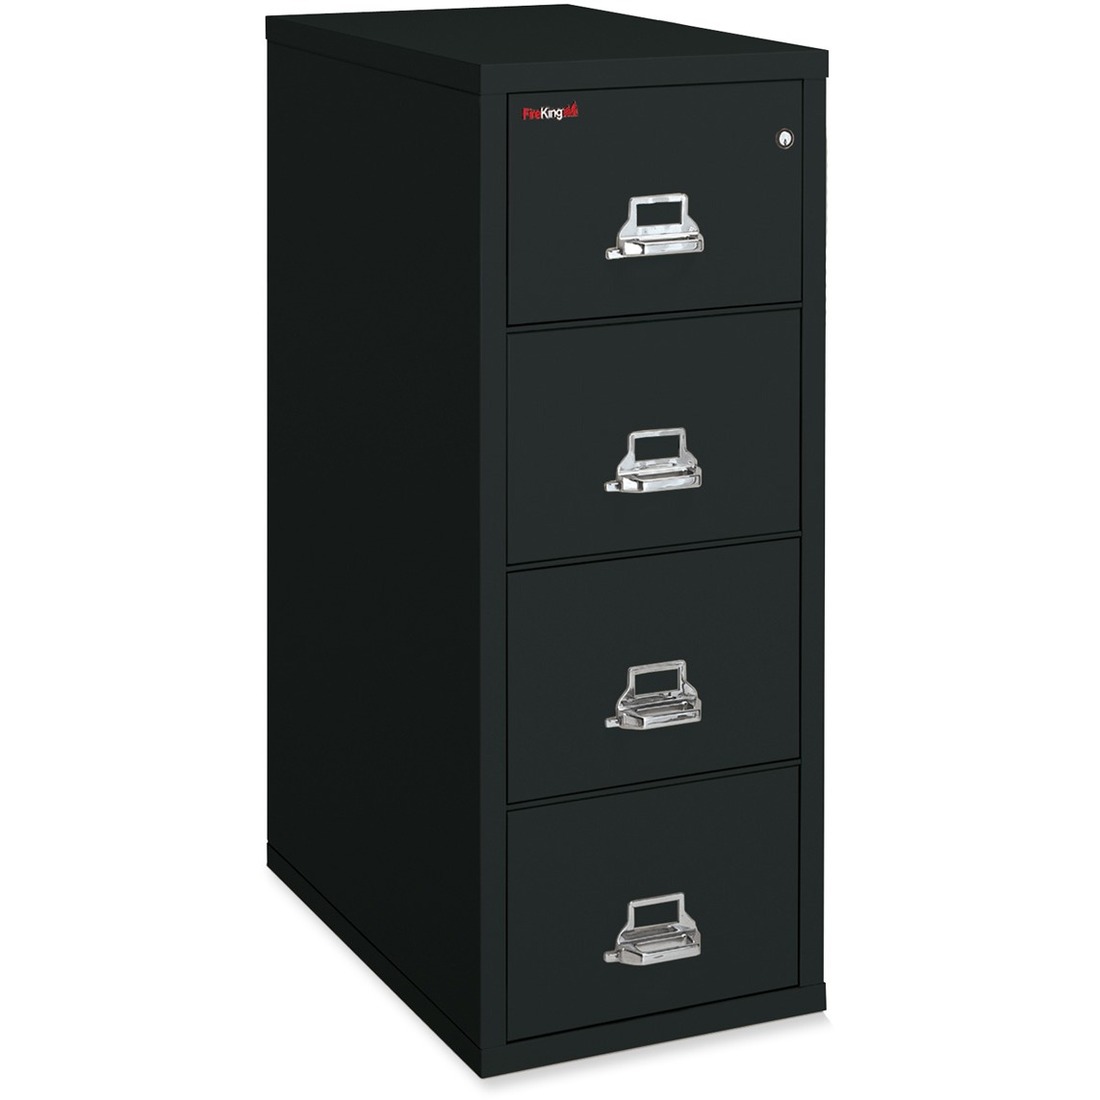 Fireking Insulated File Cabinet Madill The Office Company